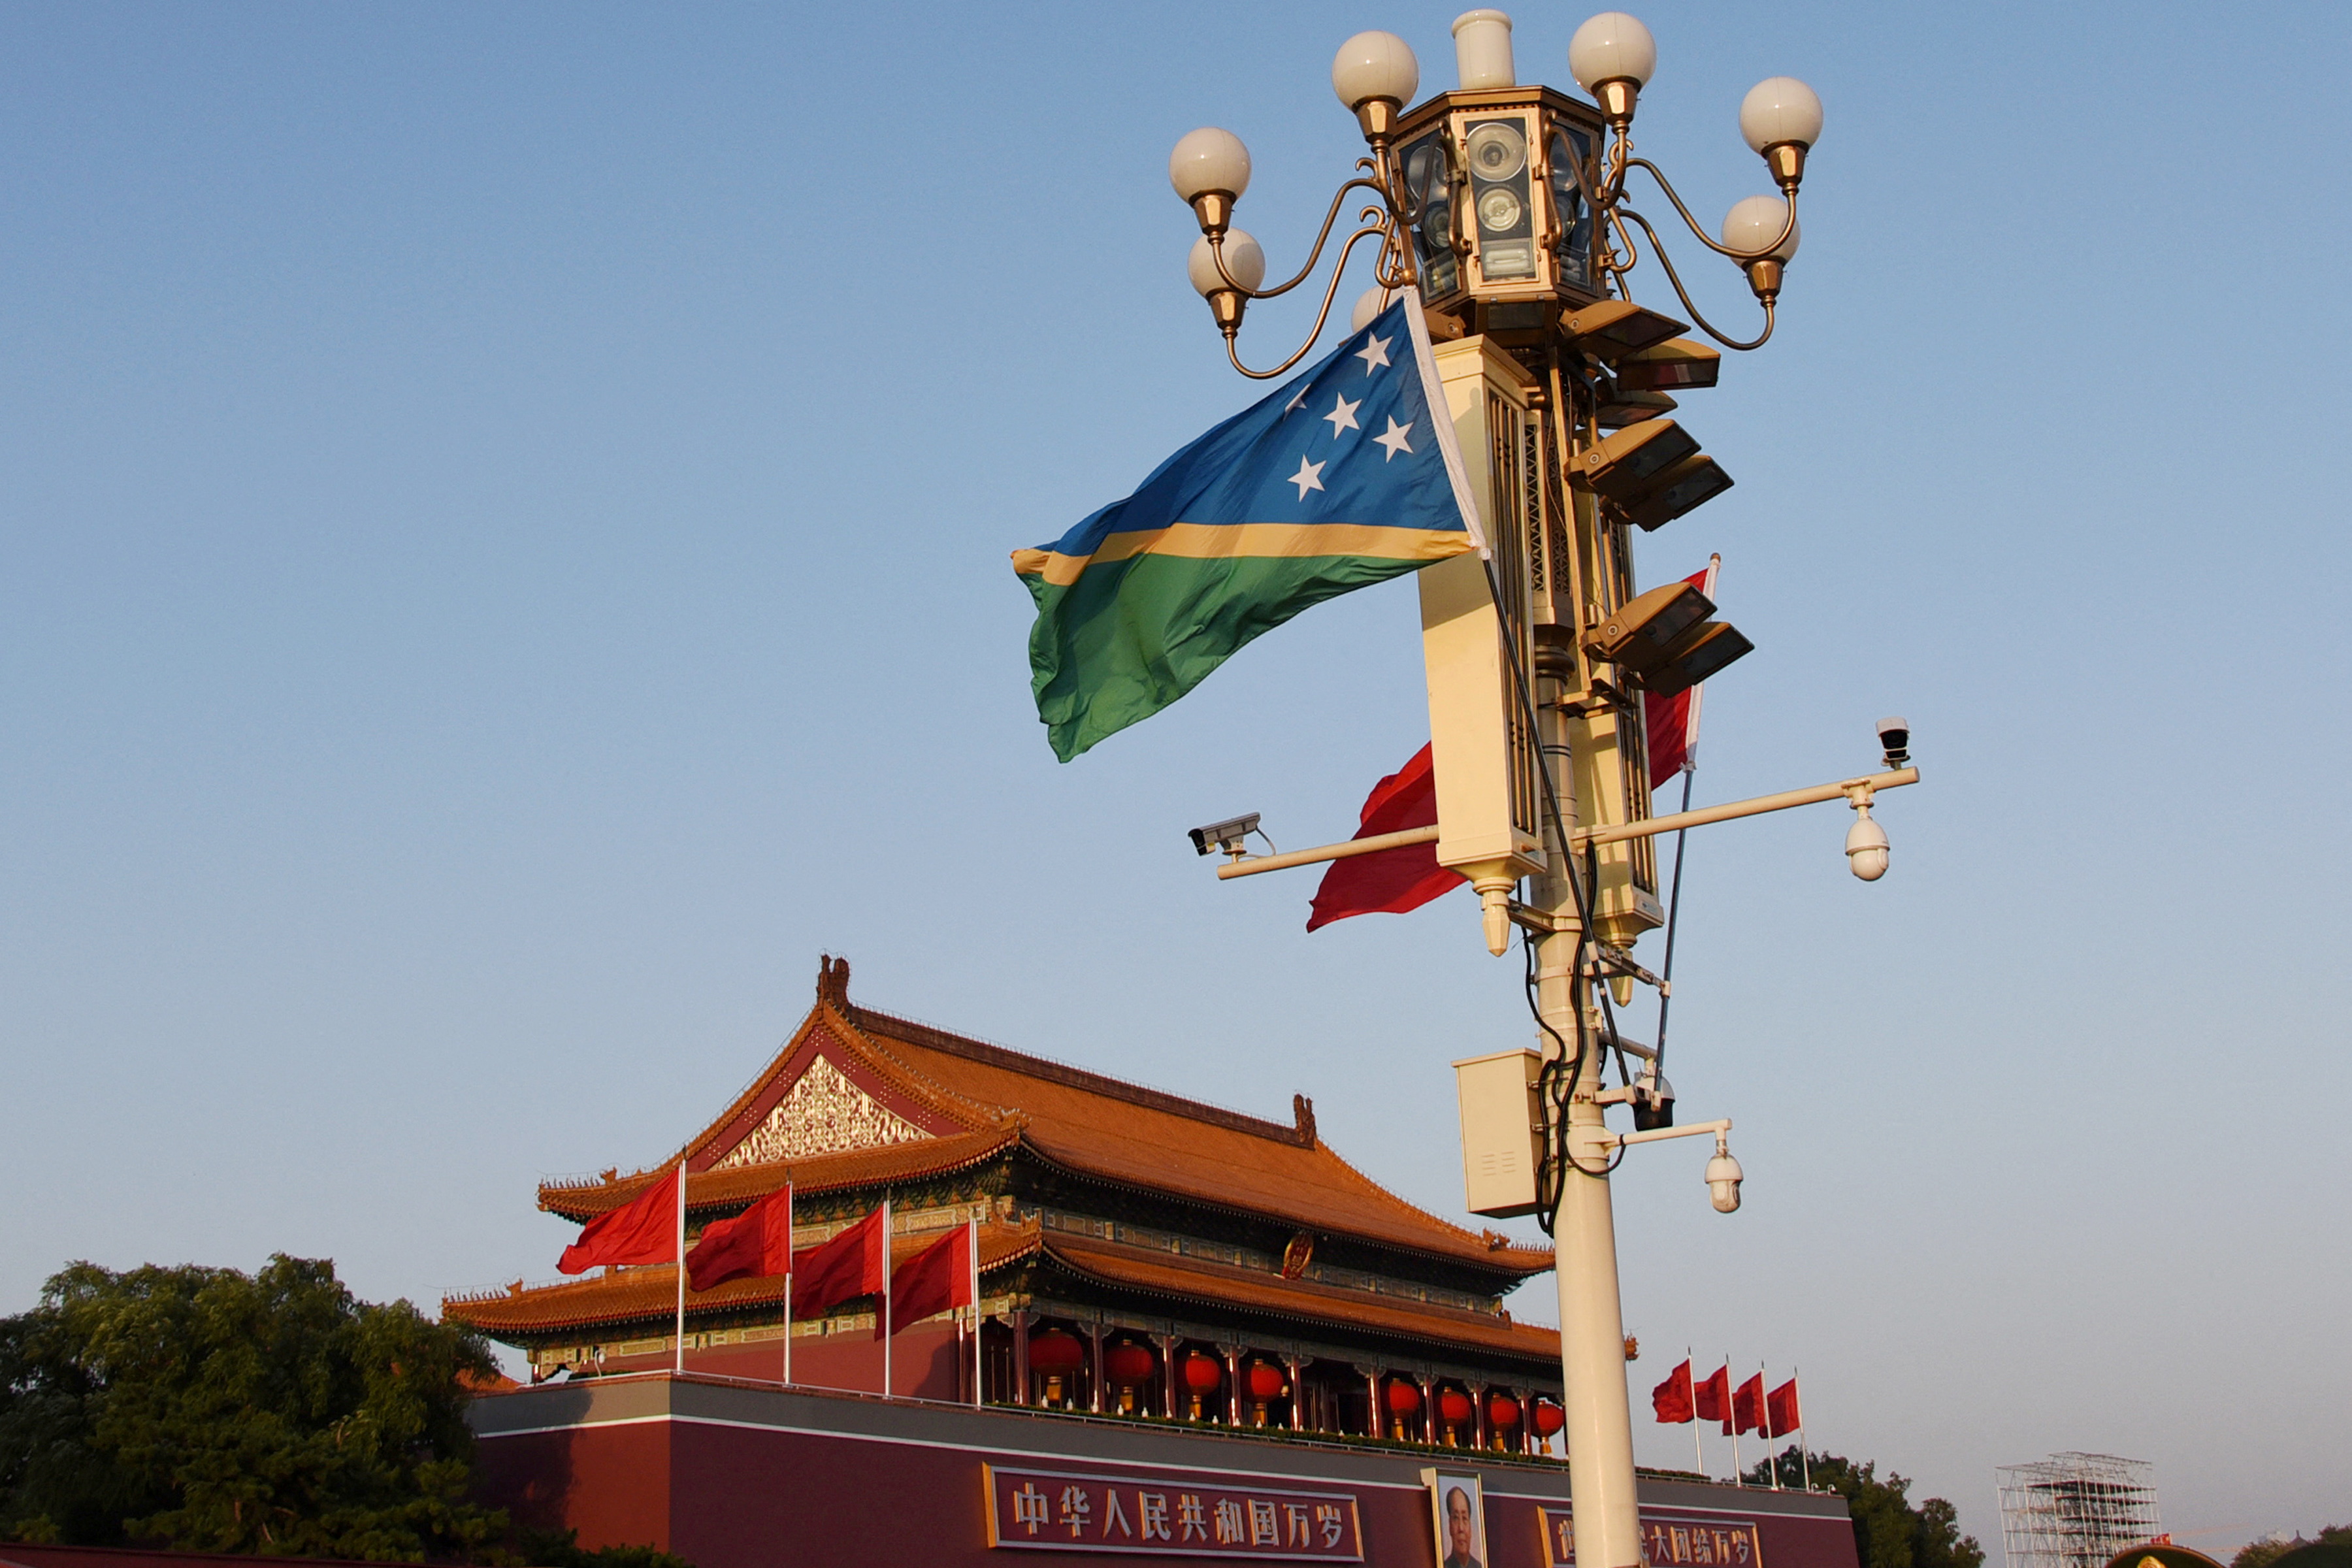 National flags of Solomon Islands and China flutter at the Tiananmen Square in Beijing